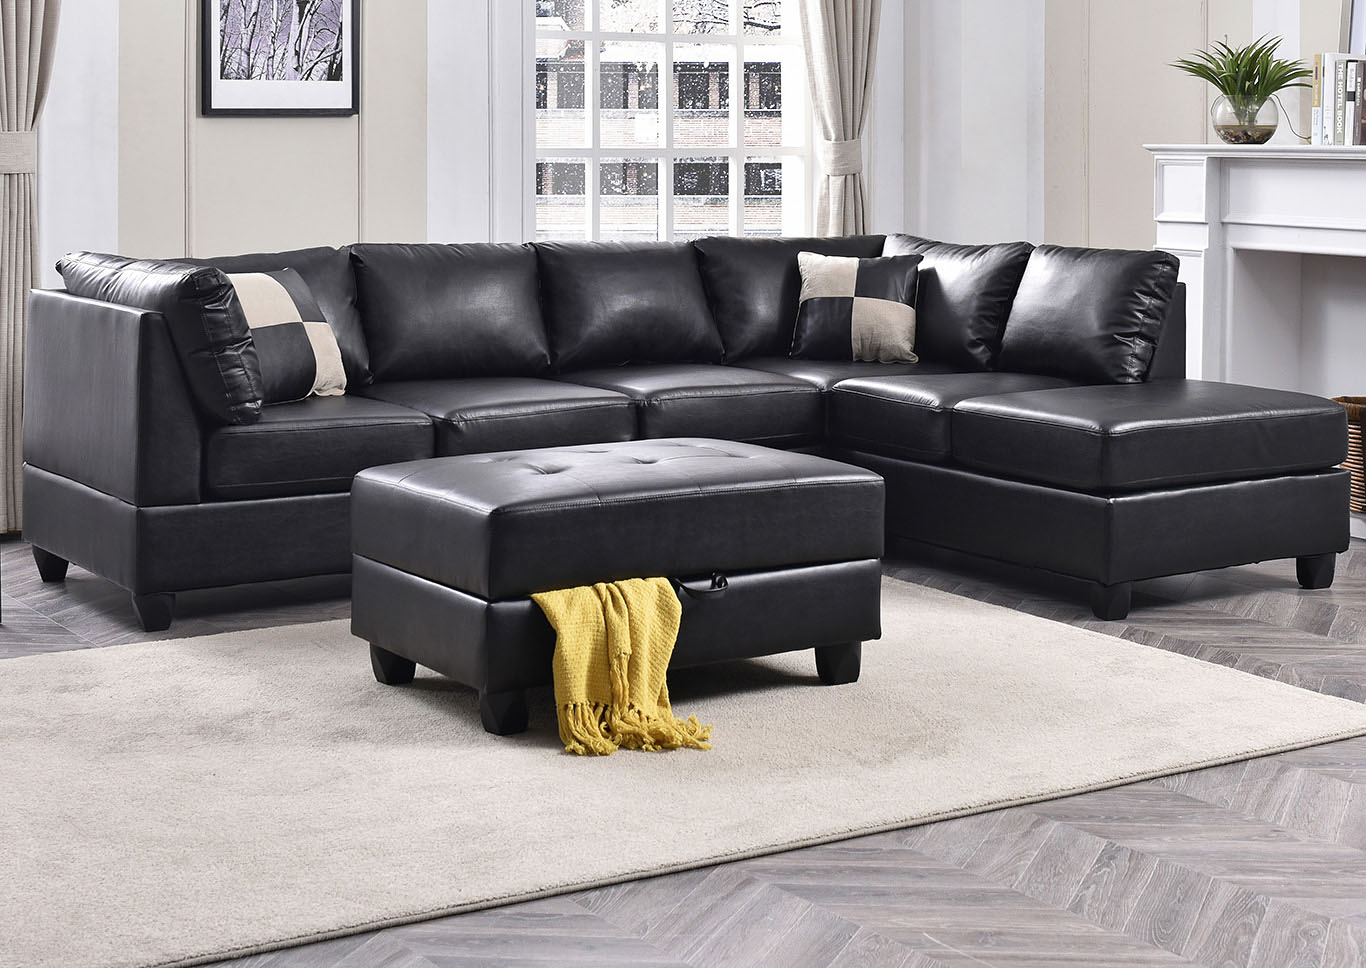 Black Faux Leather Sectional,Glory Furniture